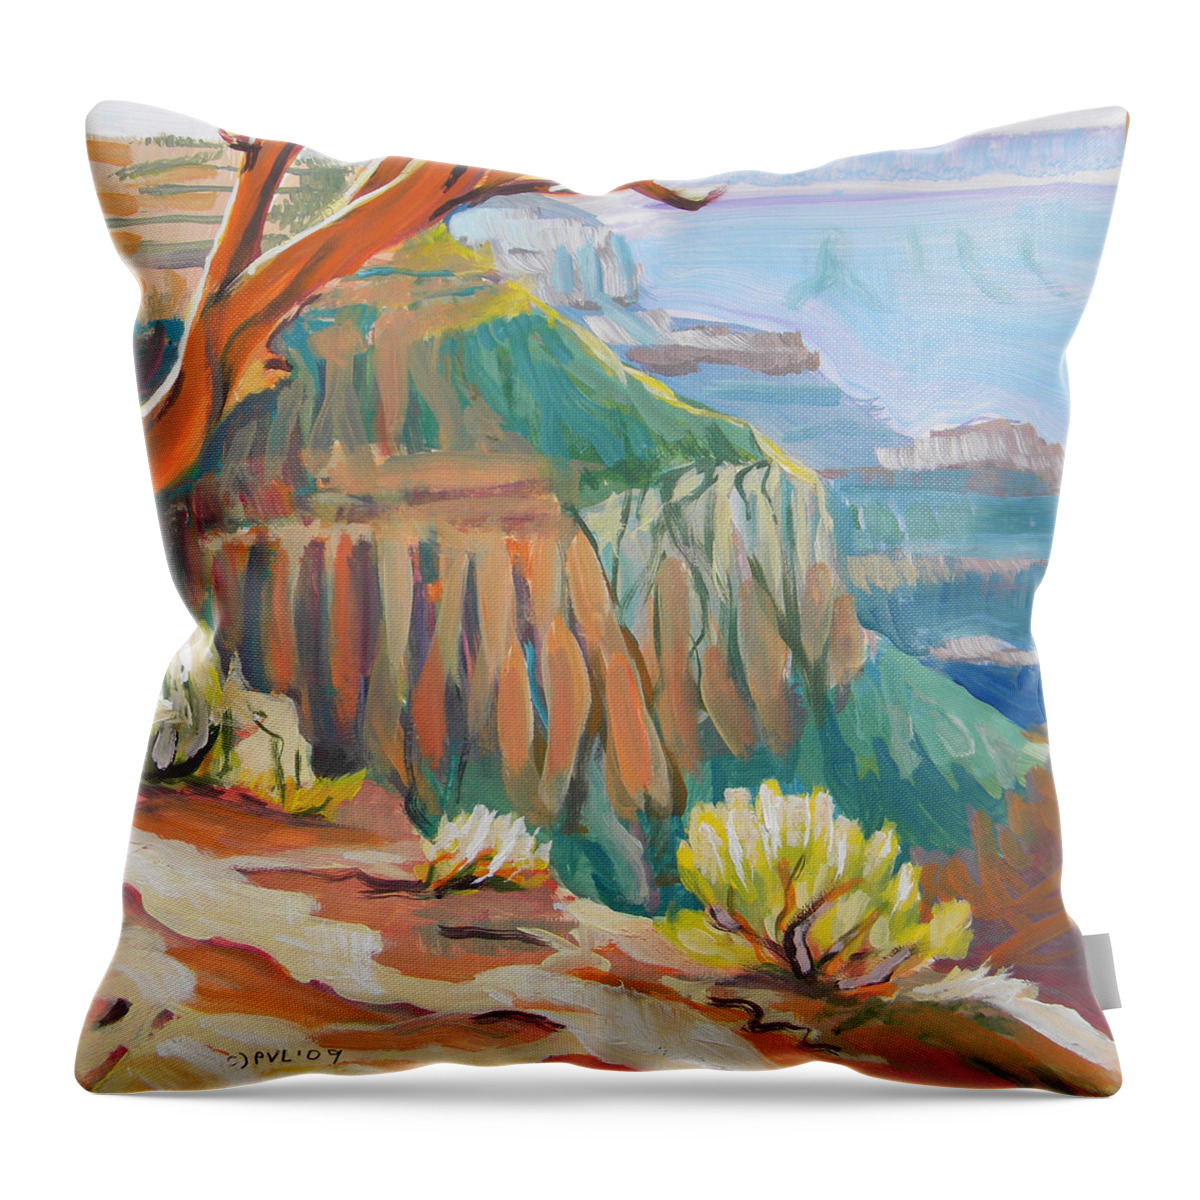 Southwest Throw Pillow featuring the painting Grand Canyon 3 by Pam Van Londen